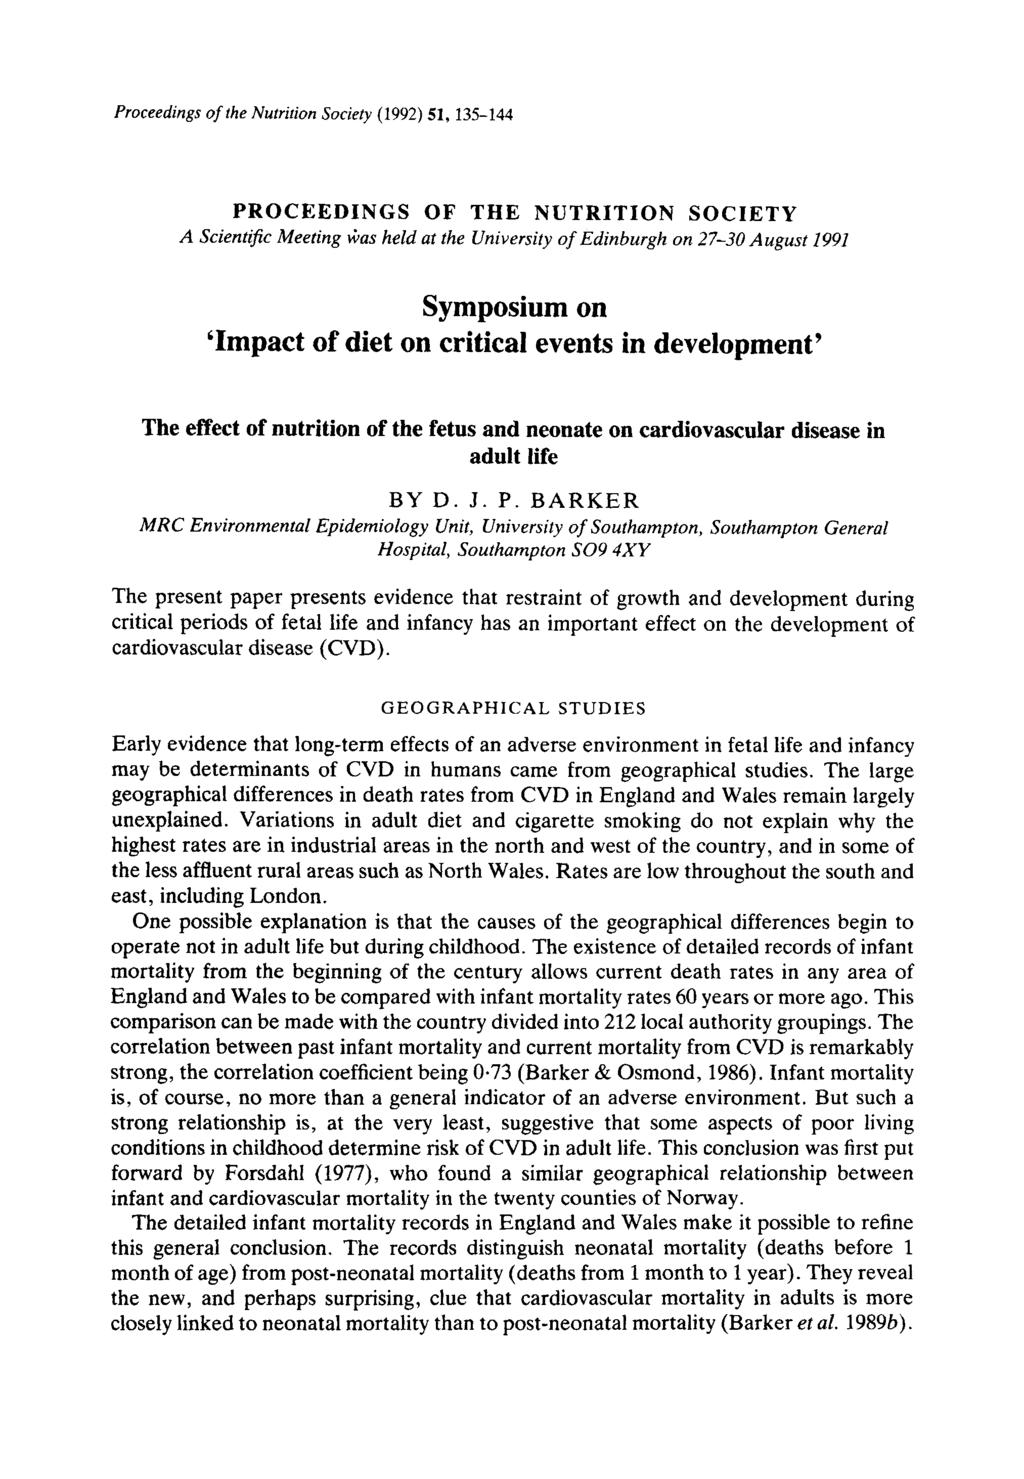 Proceedings ofthe Nutrition Society (1992) 51, 135144 PROCEEDINGS OF THE NUTRITION SOCIETY A Scientific Meeting Gas held at the University of Edinburgh on 2730 August I991 Symposium on Impact of diet